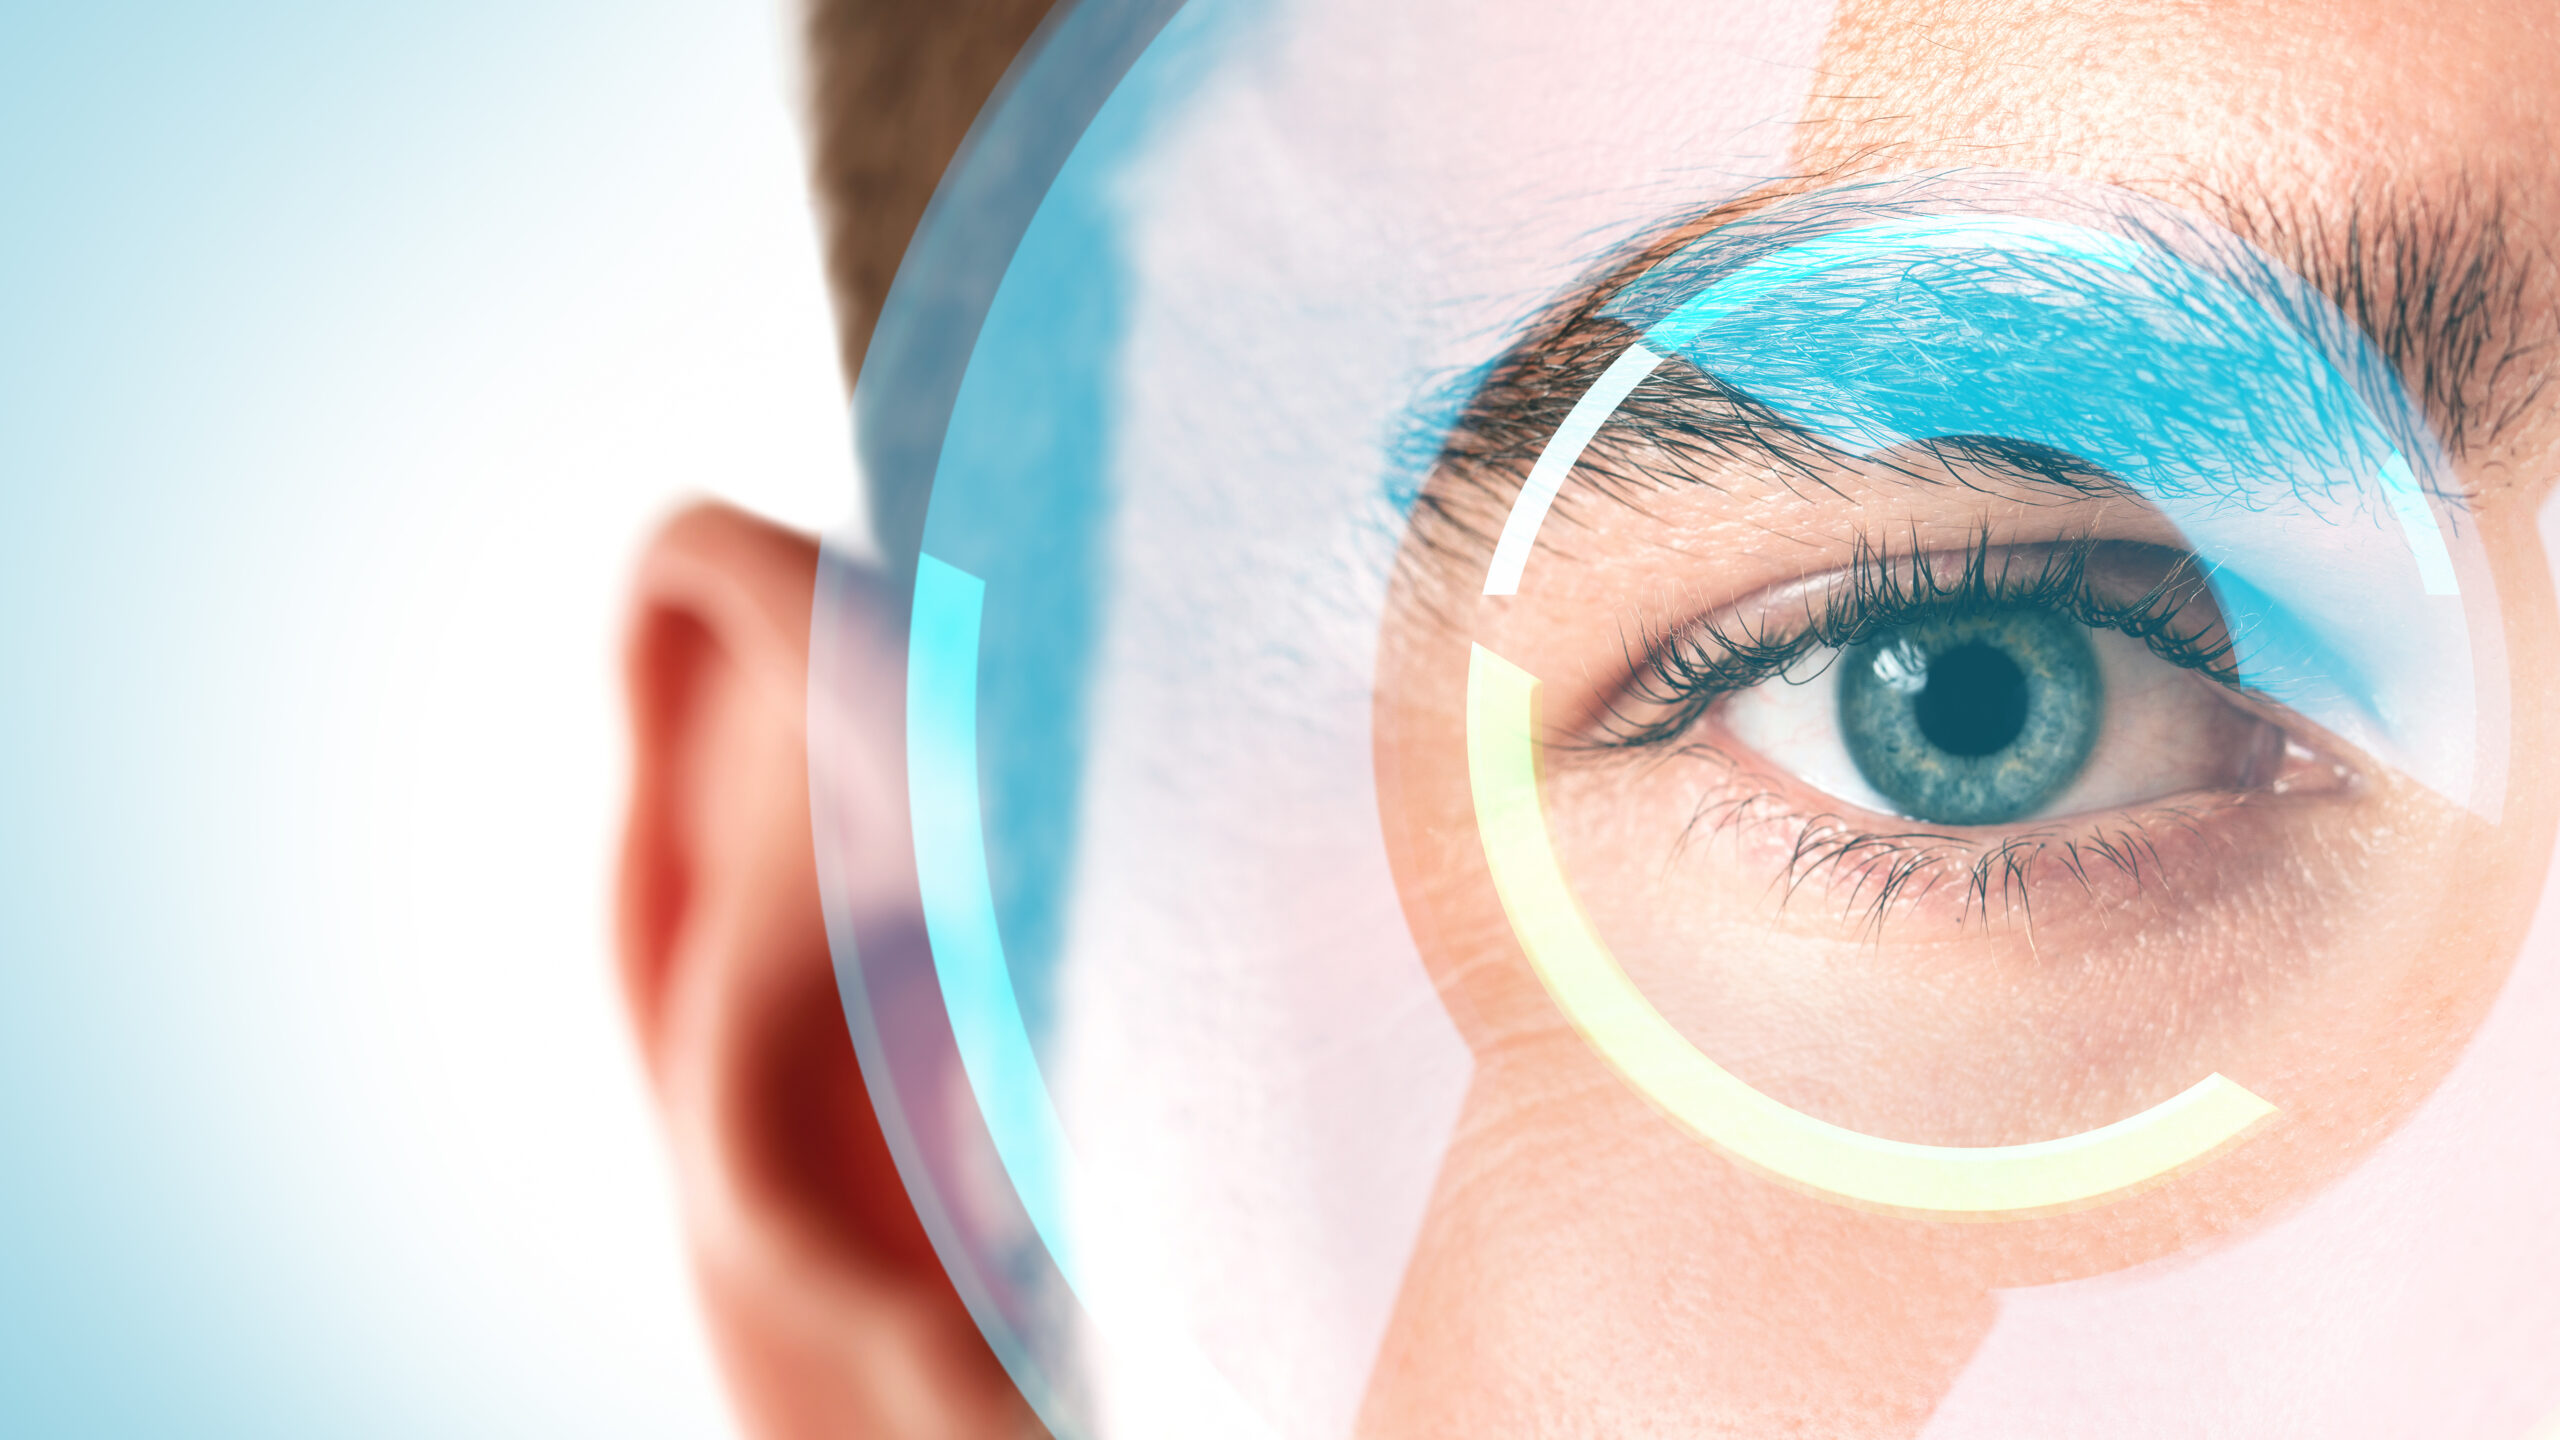 Why You Should Choose Dr. Jani for Your Laser Vision Correction